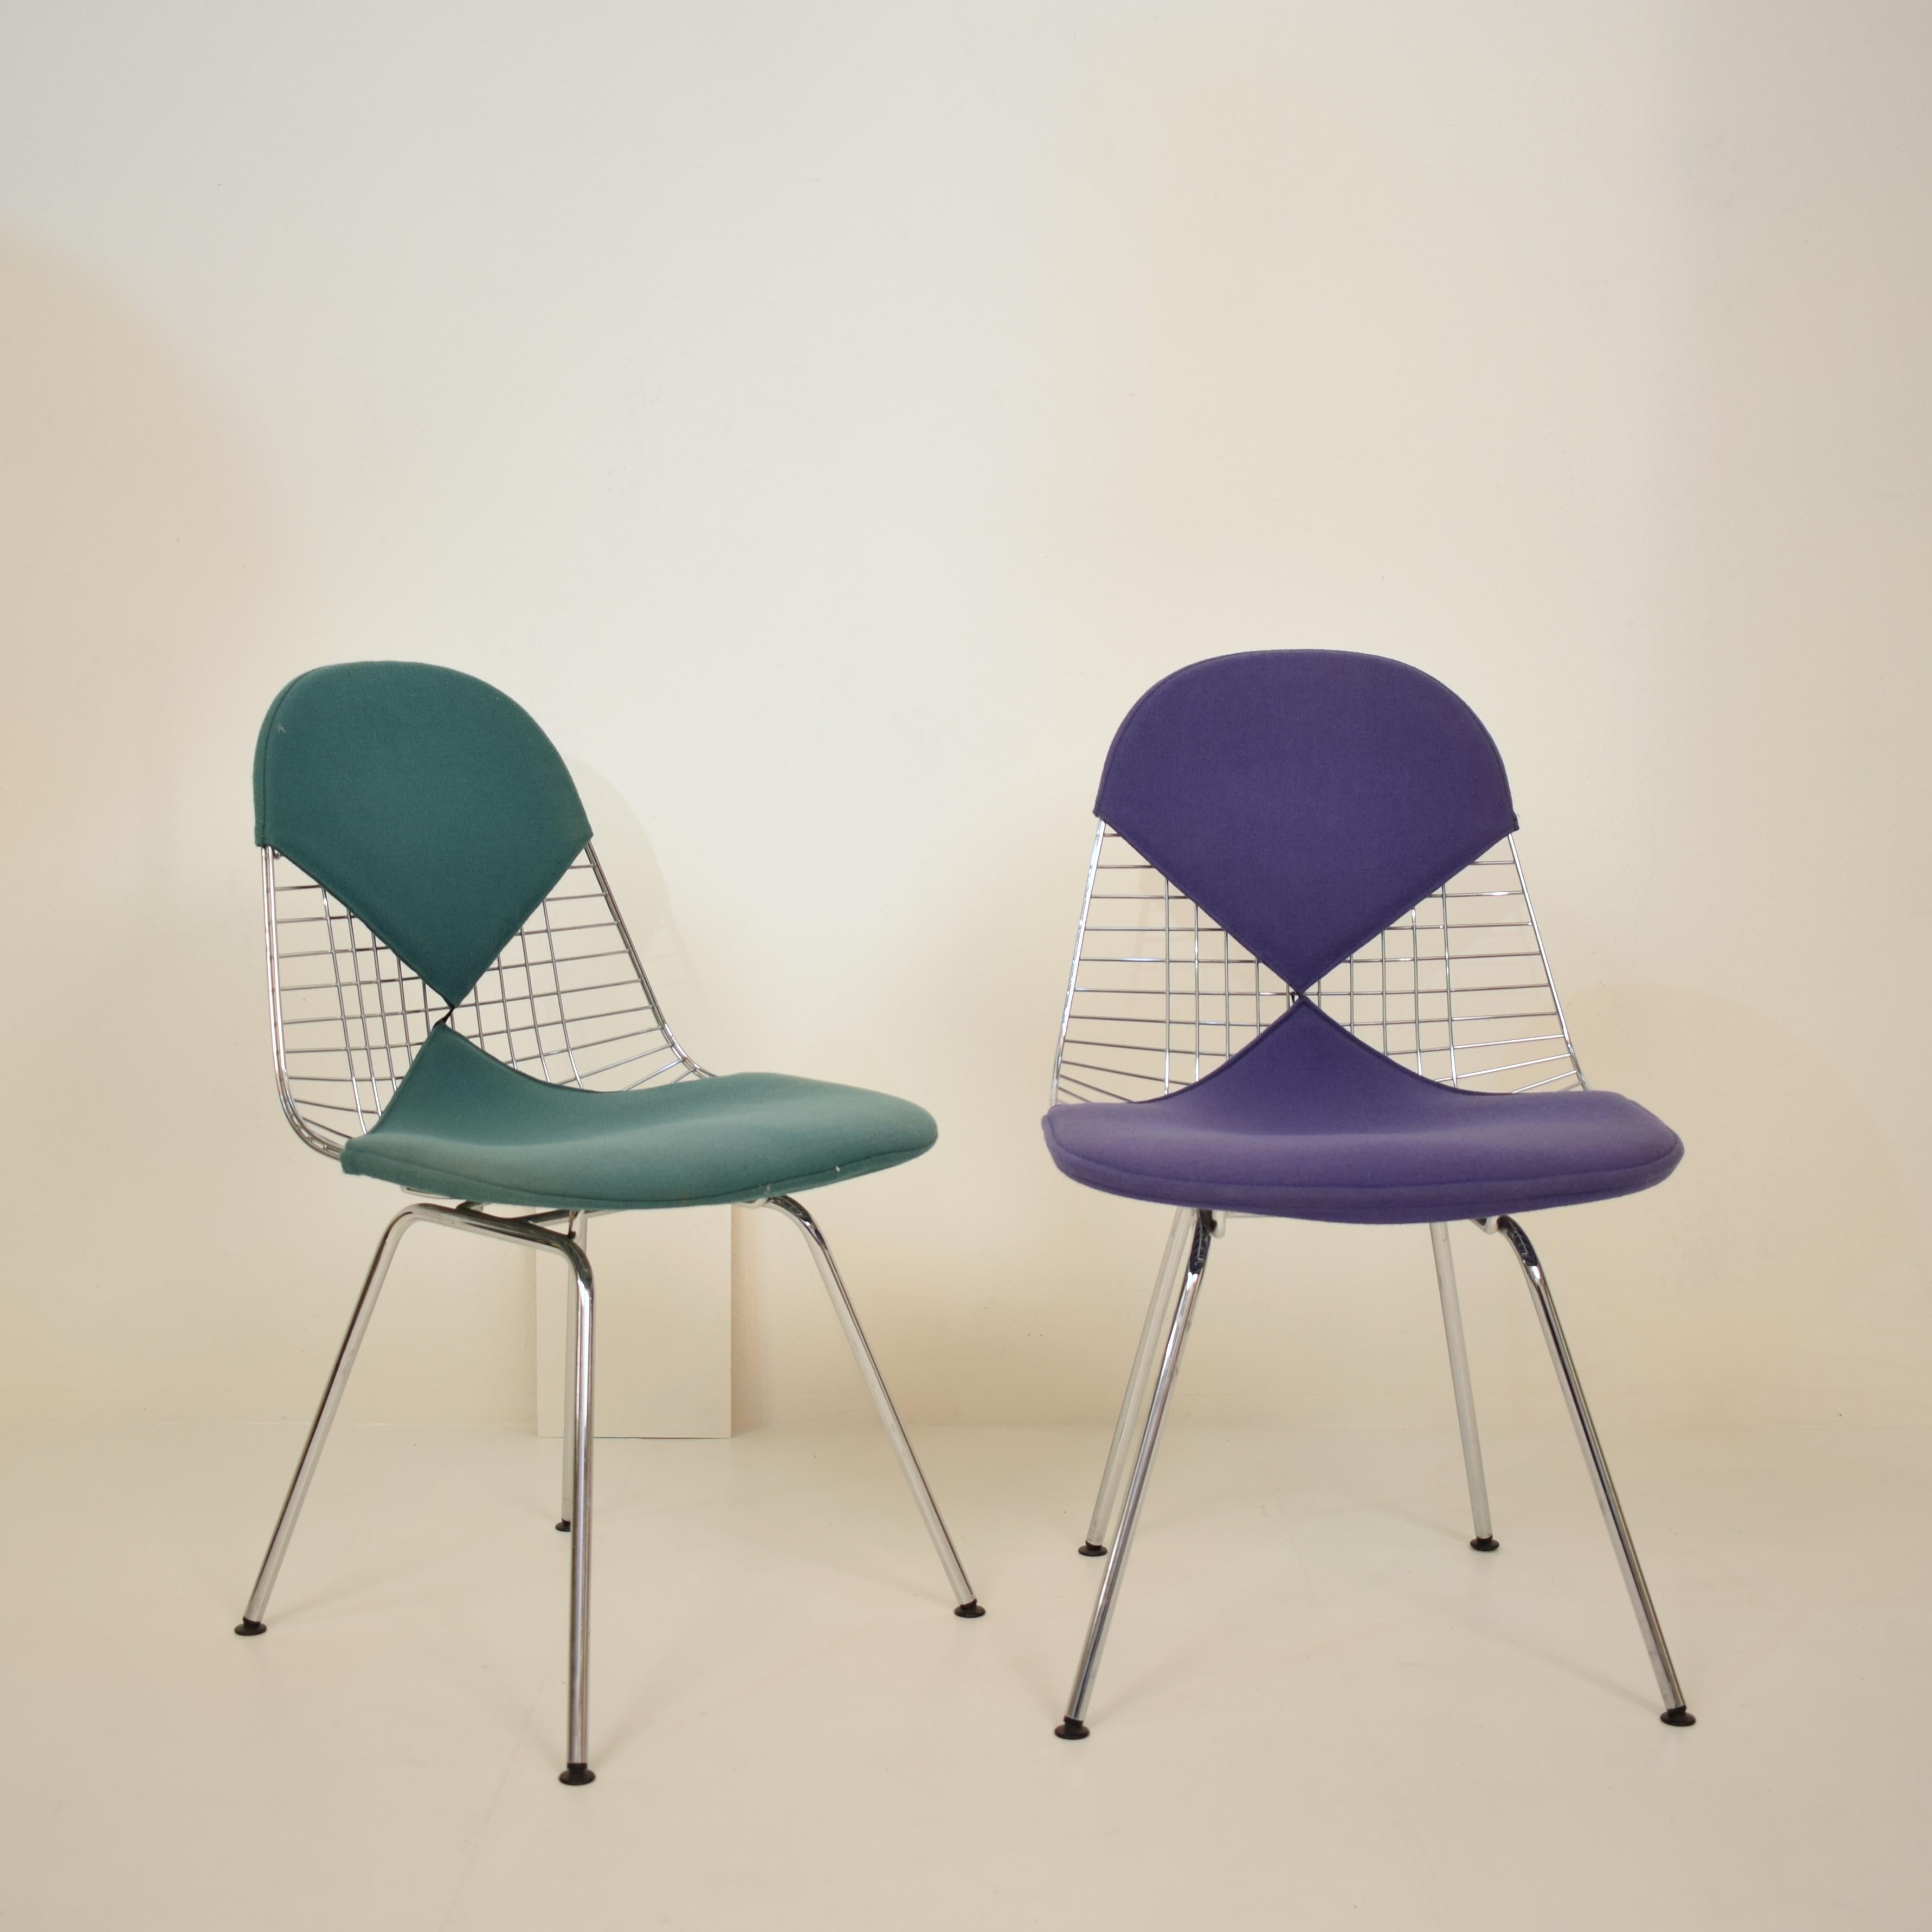 Set of two DKX-2 wire bikini shell chairs on X-bases with two different fabric covers designed by Charles and Ray Eames for Herman Miller. 
They are in beautiful vintage condition. The green and the purple bikini covers have been cleaned but have